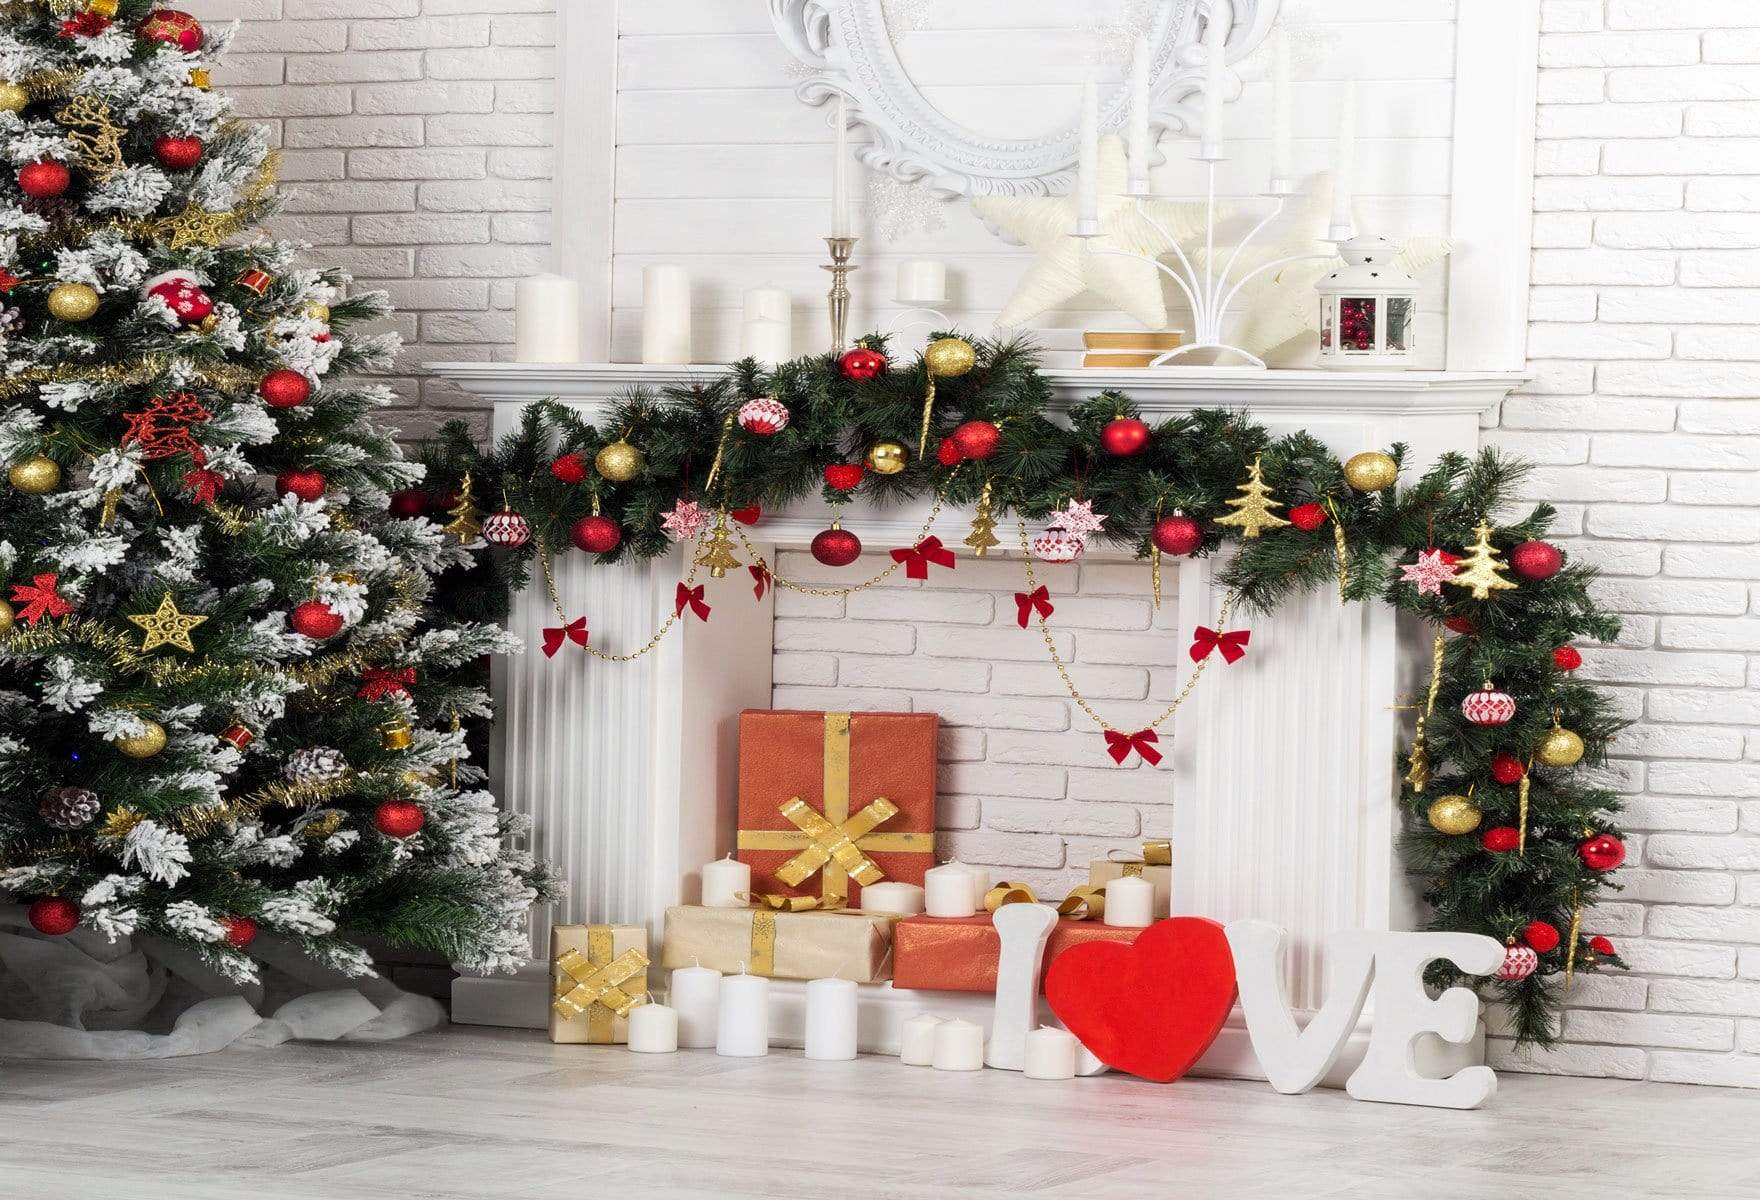 Katebackdrop£ºKate Christmas Tree And Gift Candle Decorations Backdrops for Photography